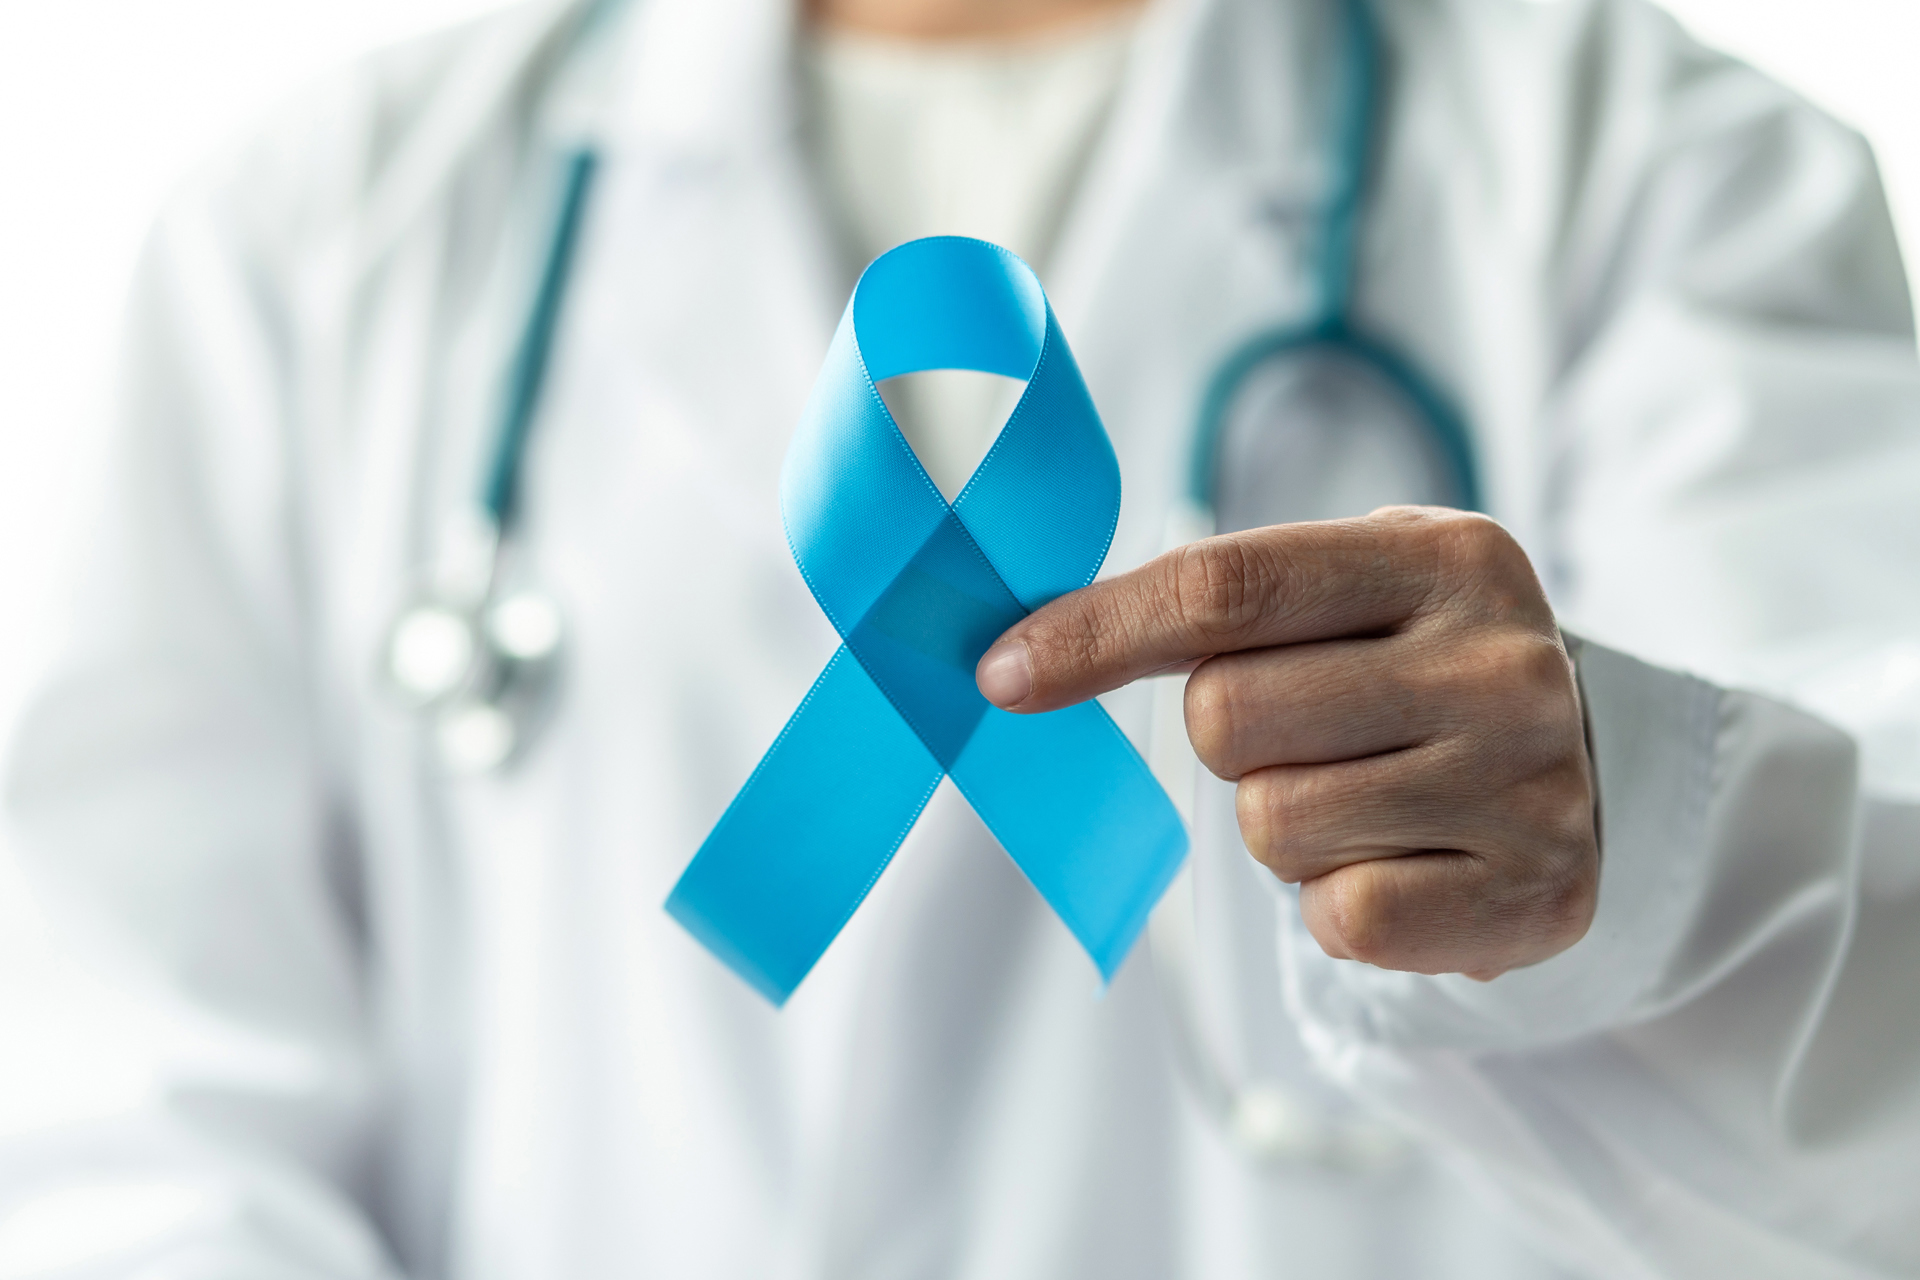 PROSTATE CANCER AWARENESS MONTH